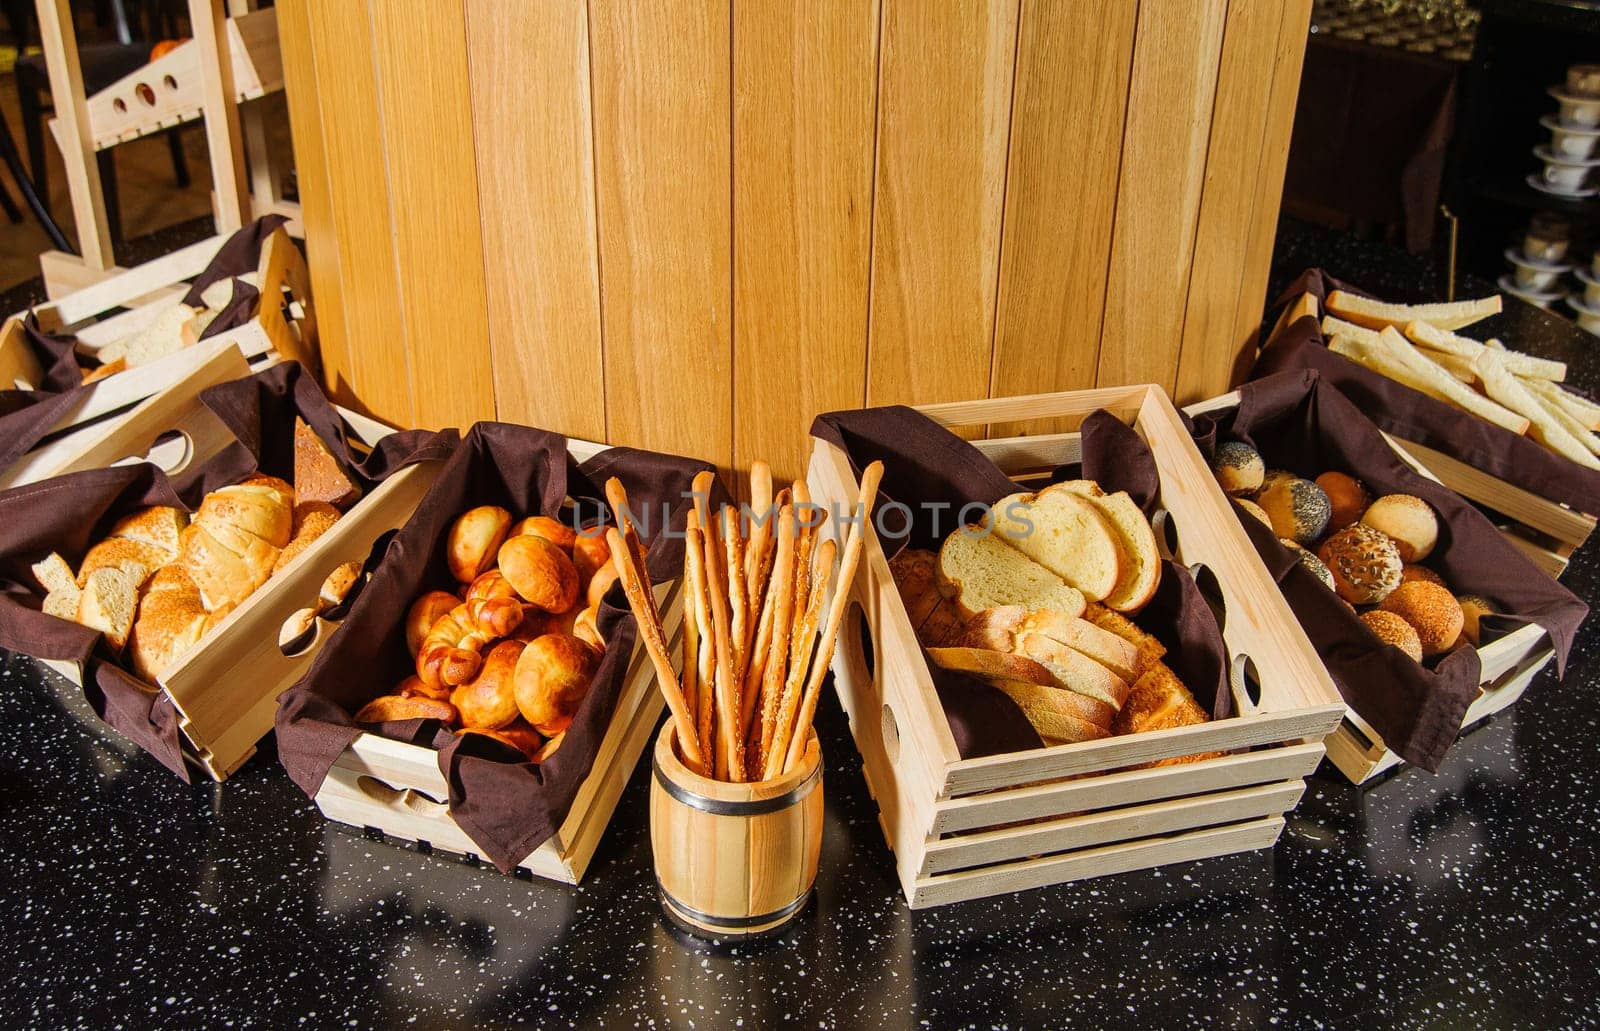 A buffet table with variety of bread in the wooden baskets by A_Karim